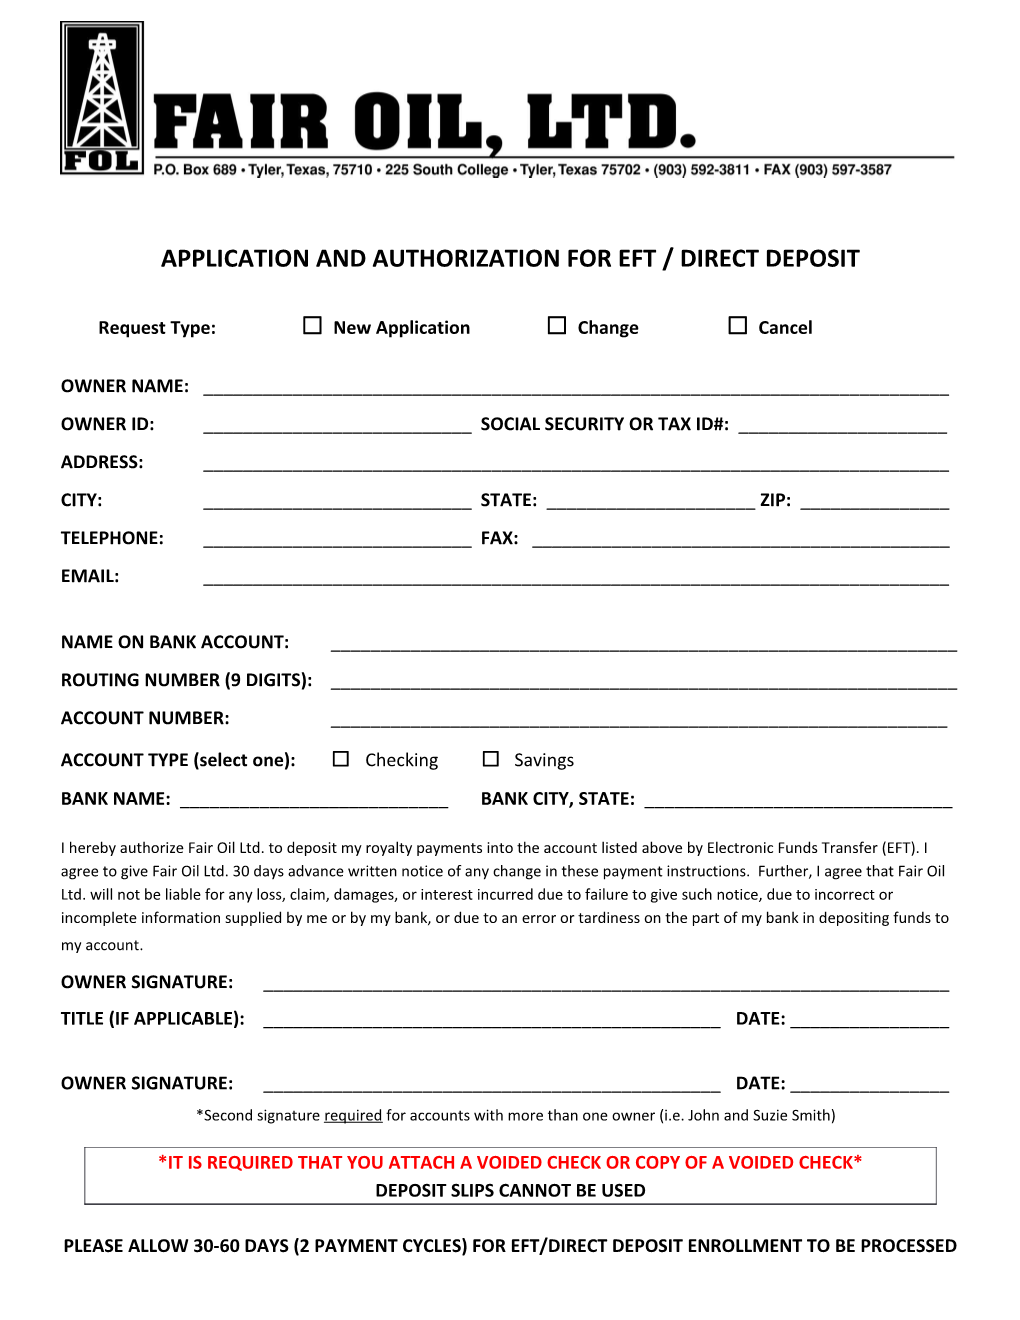 Application and Authorization for Eft / Direct Deposit